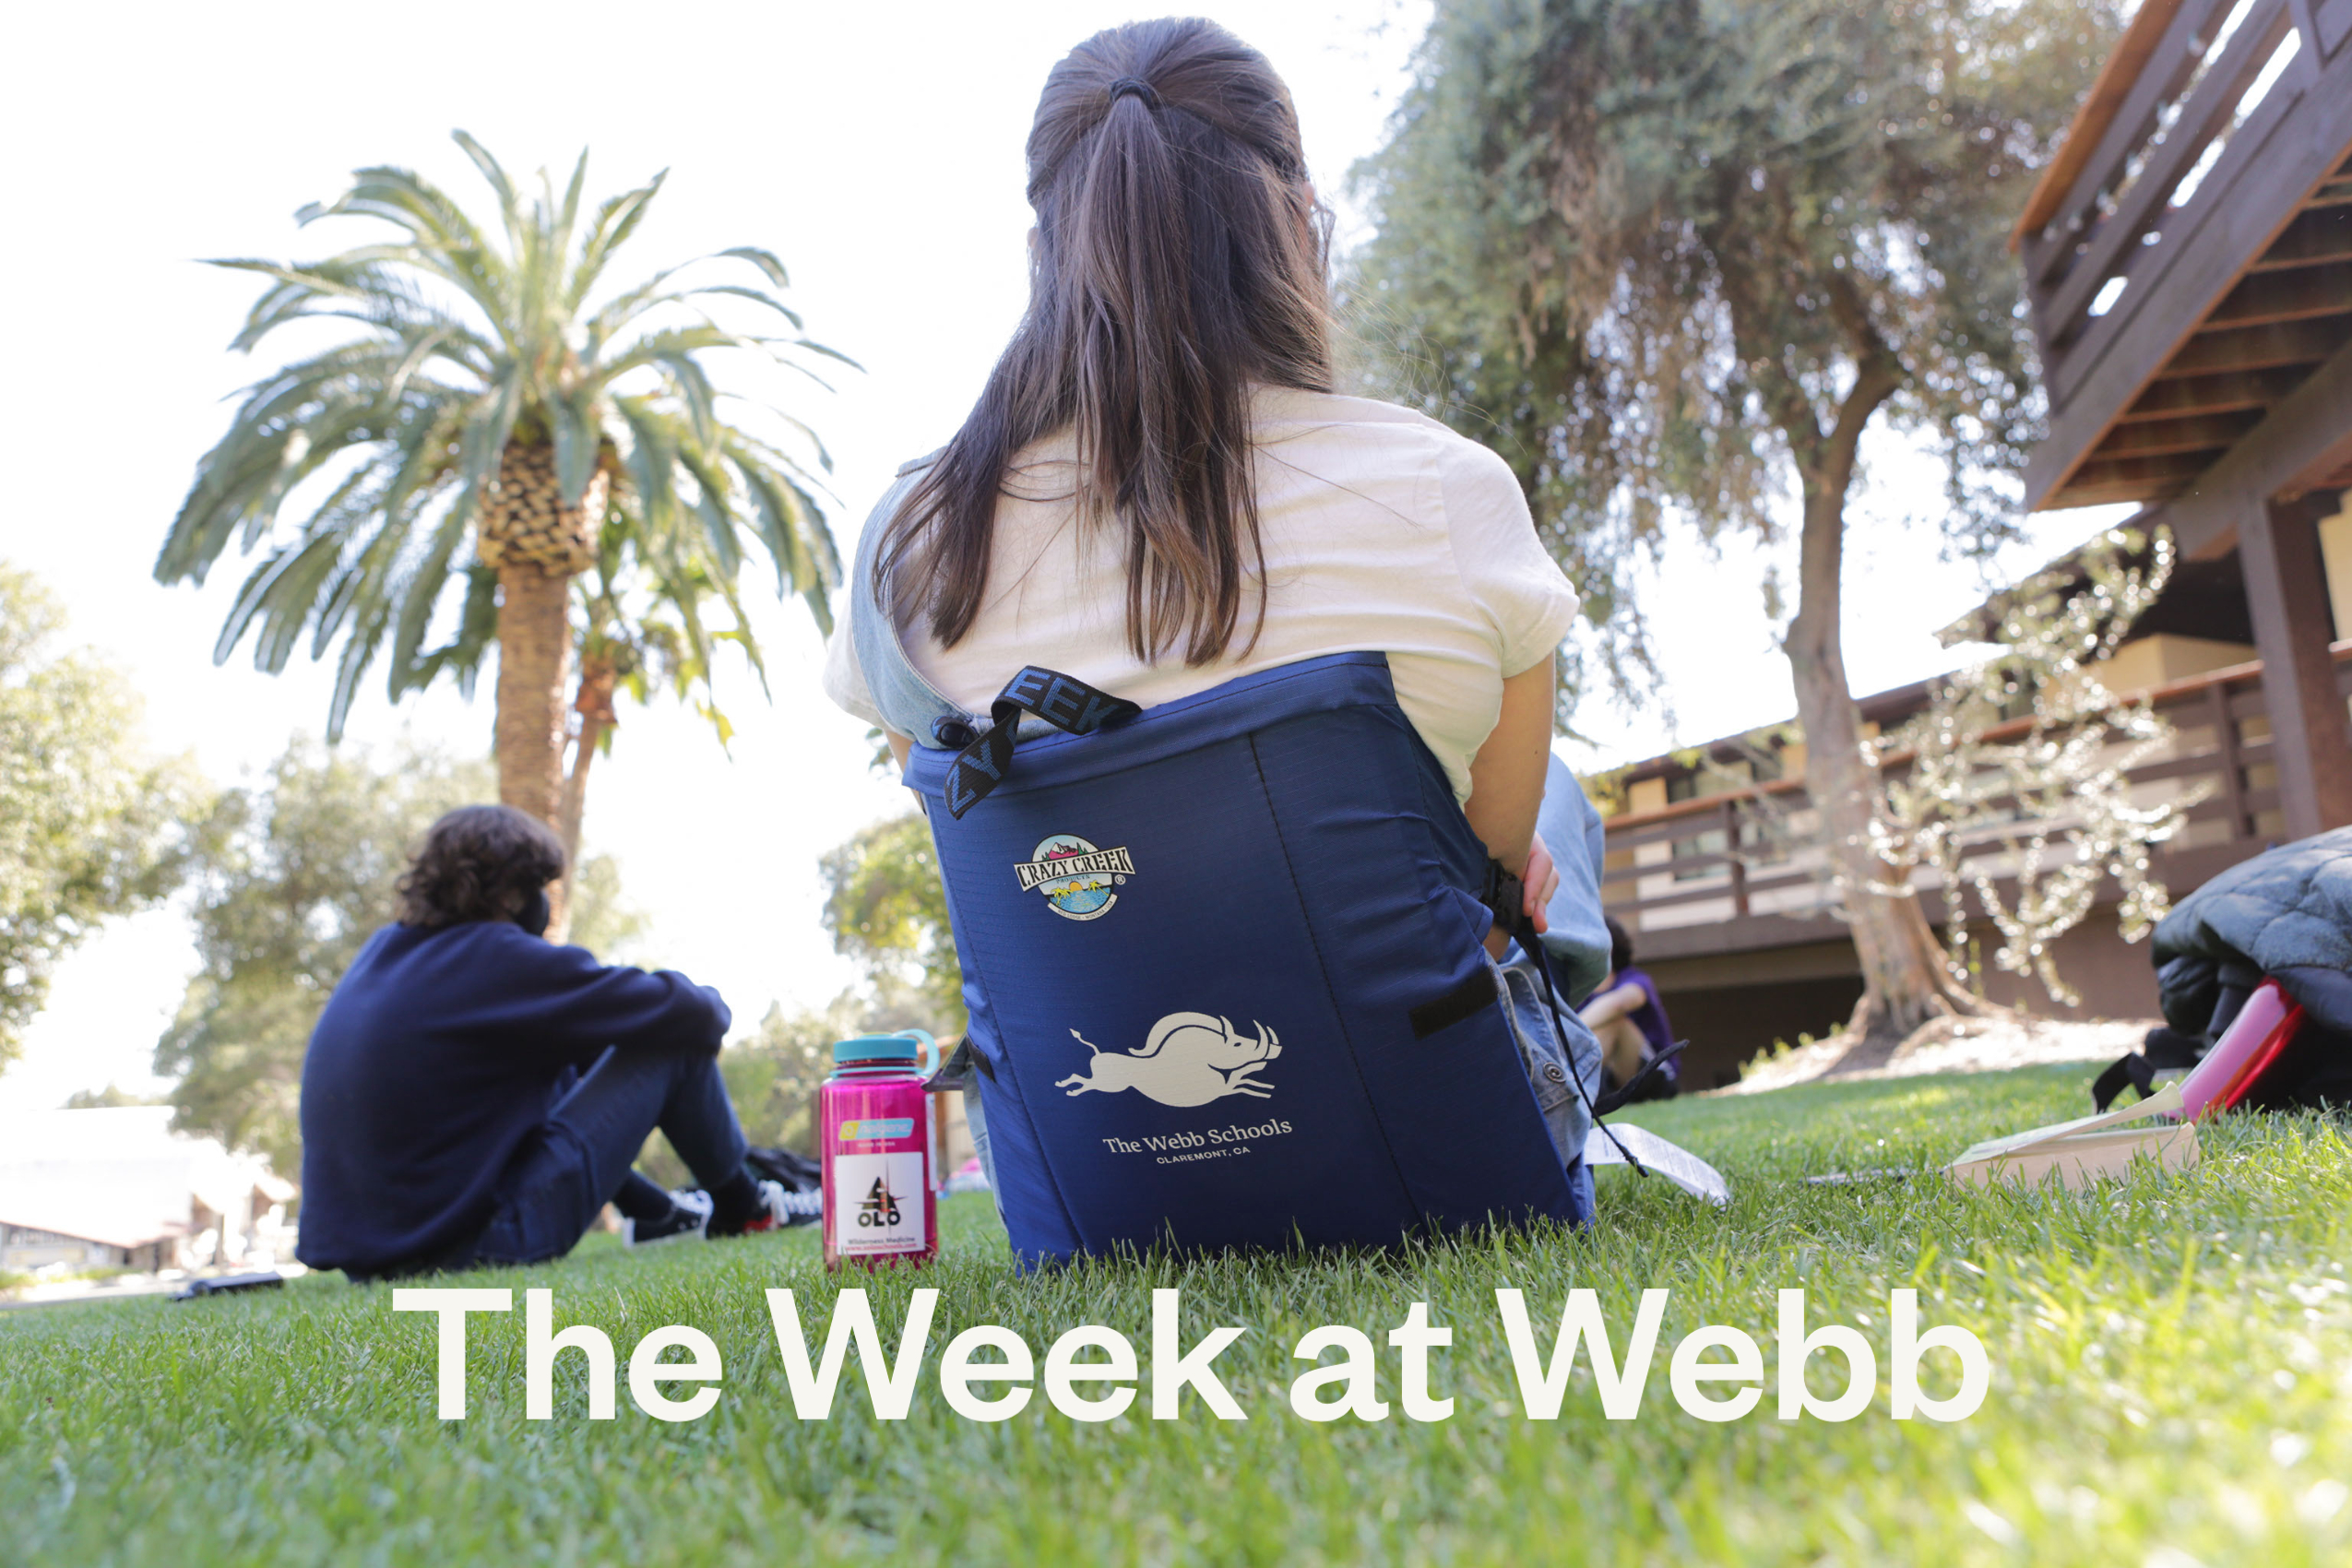 The Week at Webb title slide with person sitting in Crazy Creek chair outside